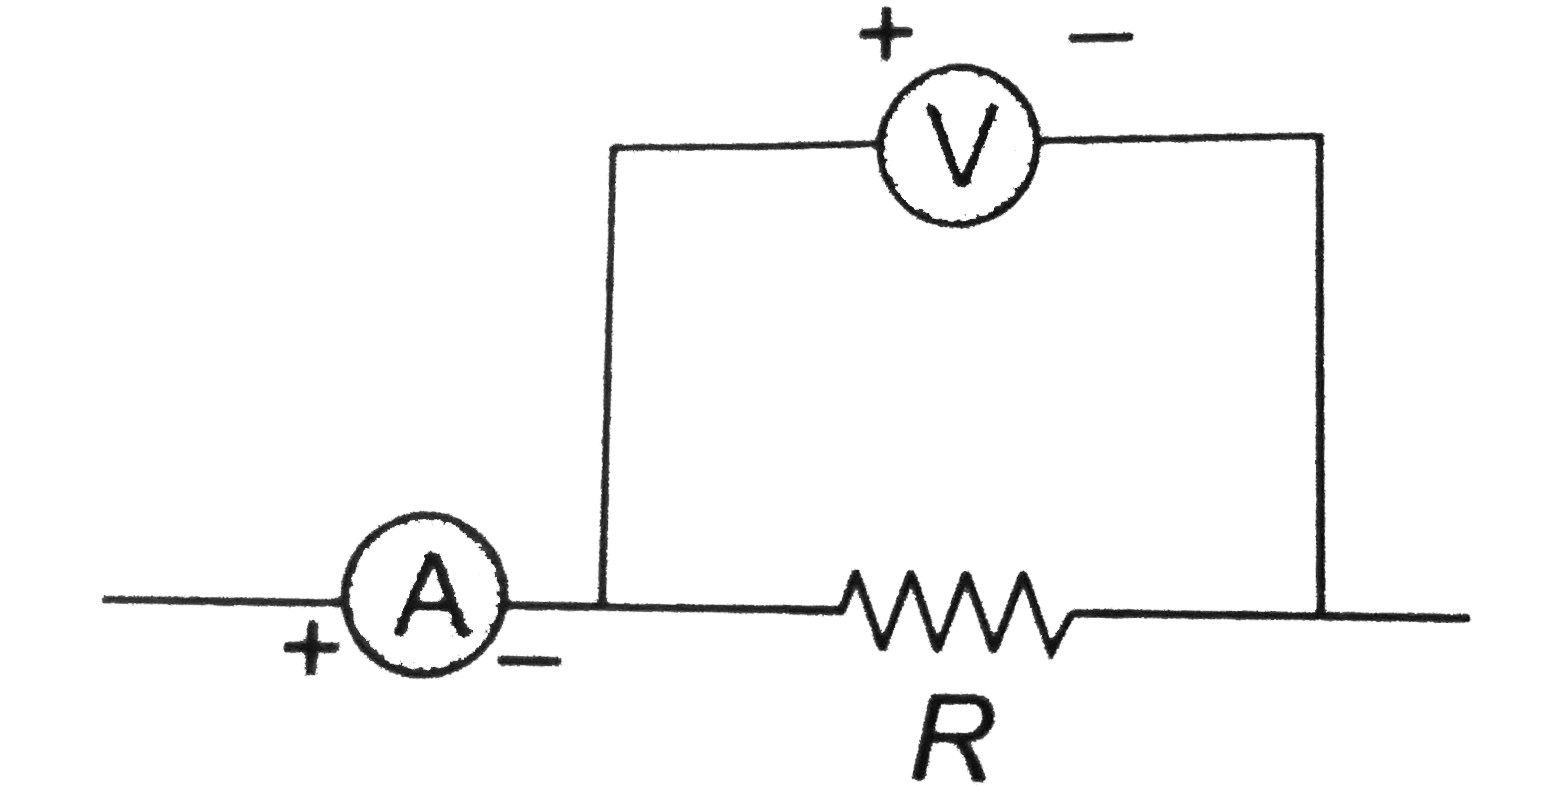 A candidate connects a moving coil voltmeter V, a moving coil ammeter A and a resistance R as shown in figure. If the voltmeter reads 24 V and the ammeter reads 4 A, R is